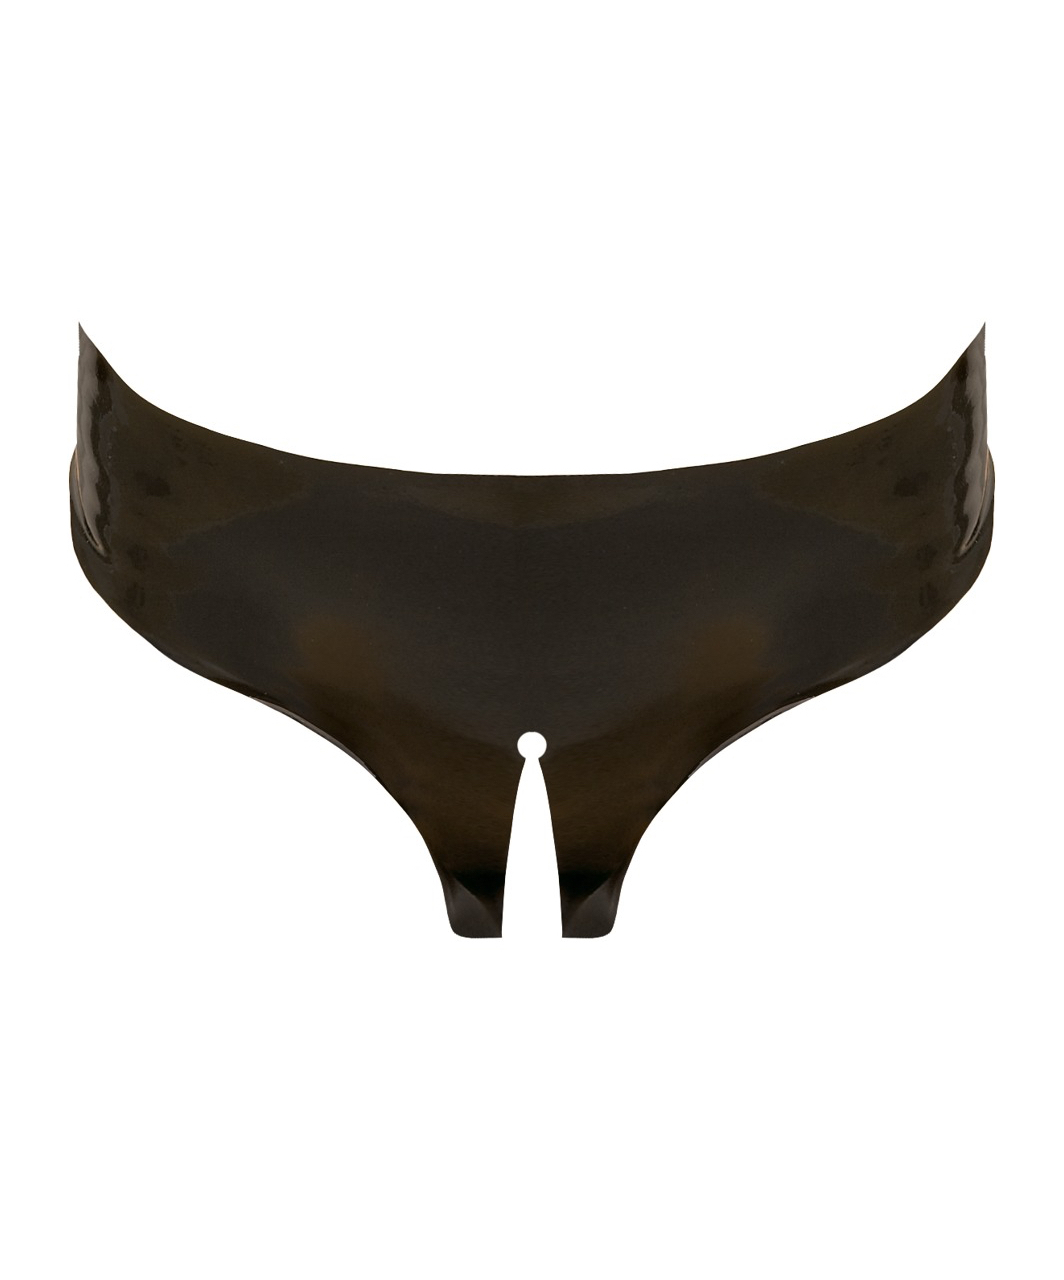 Late X black latex crotchless briefs